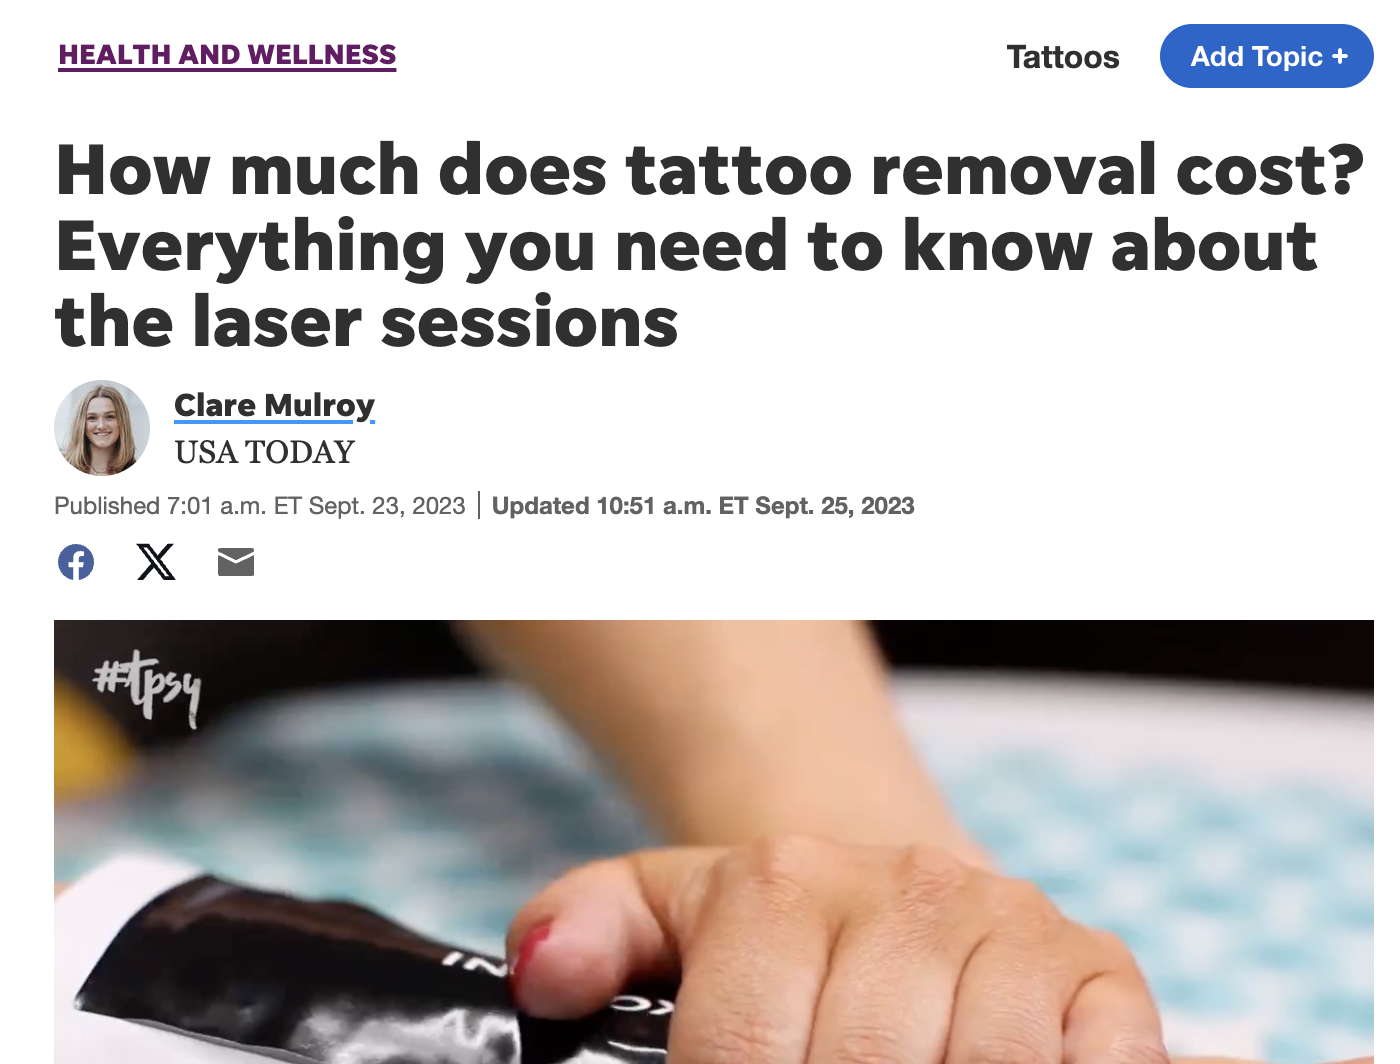 JUVA Skin & Laser Center Blog | USA Today featured Dr. Bruce Katz in an article about Laser Tattoo Removal.